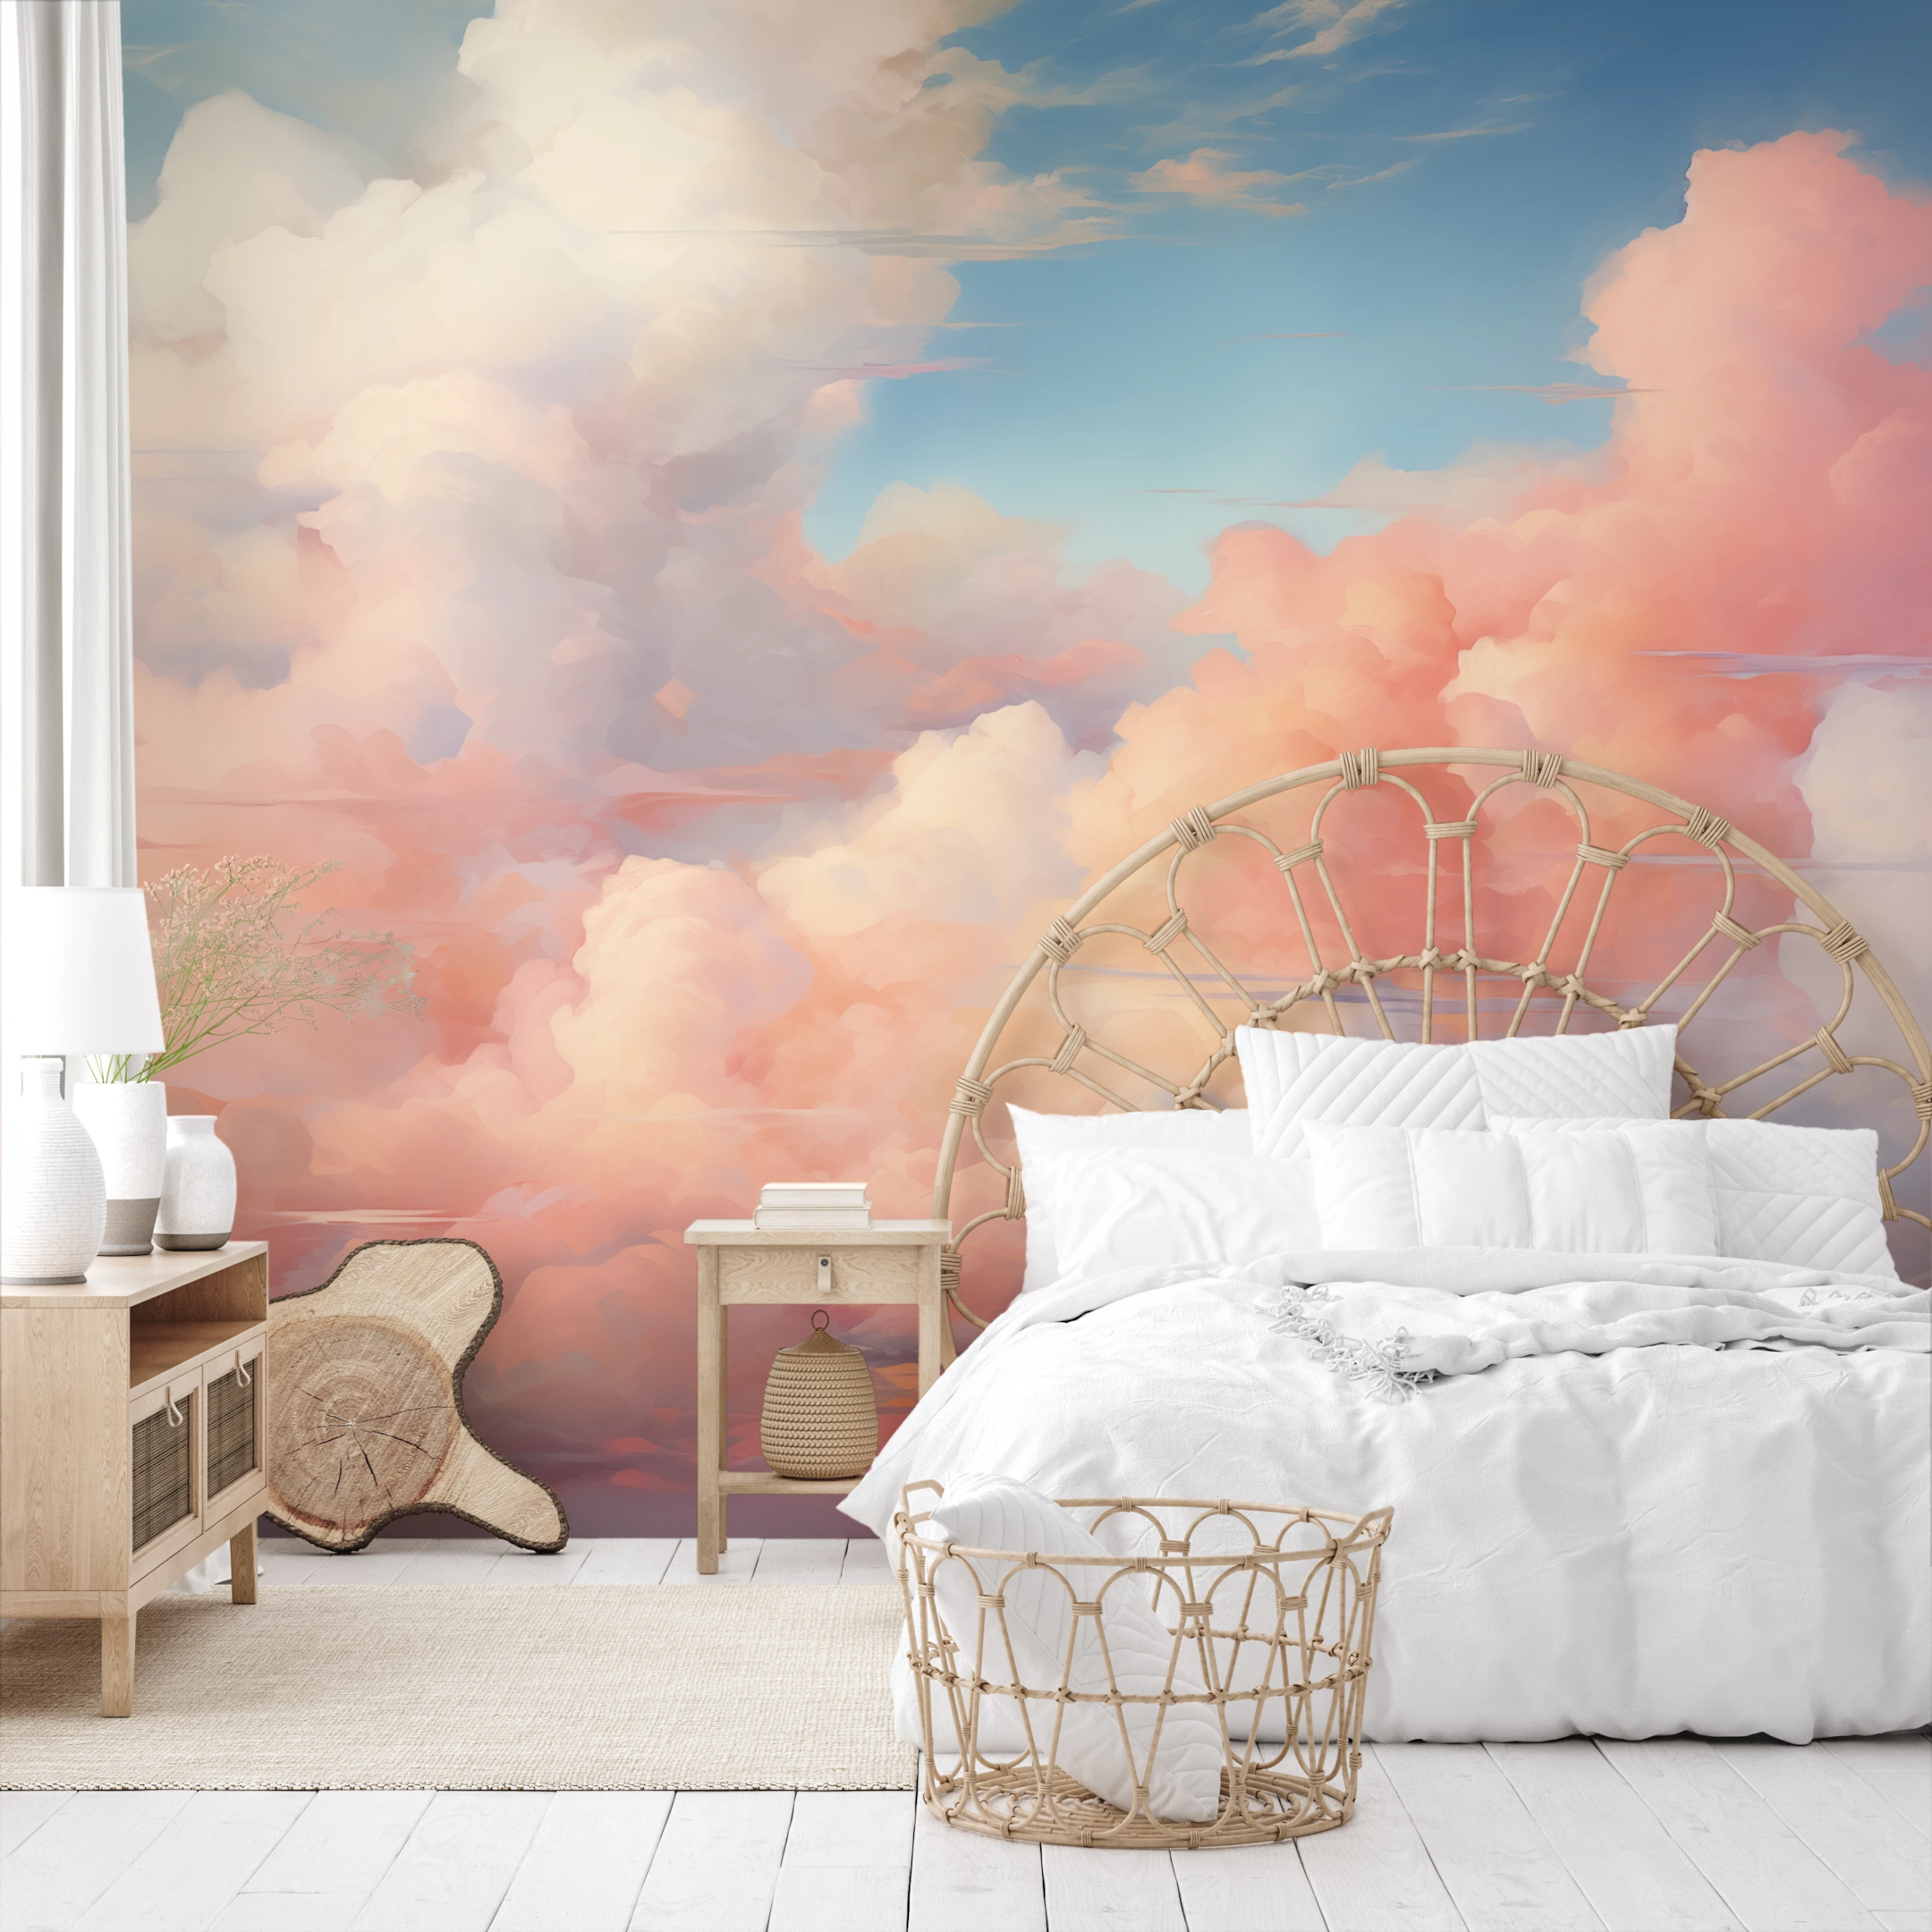 One of the Decomura photo wallpaper patterns from the "Clouds" collection